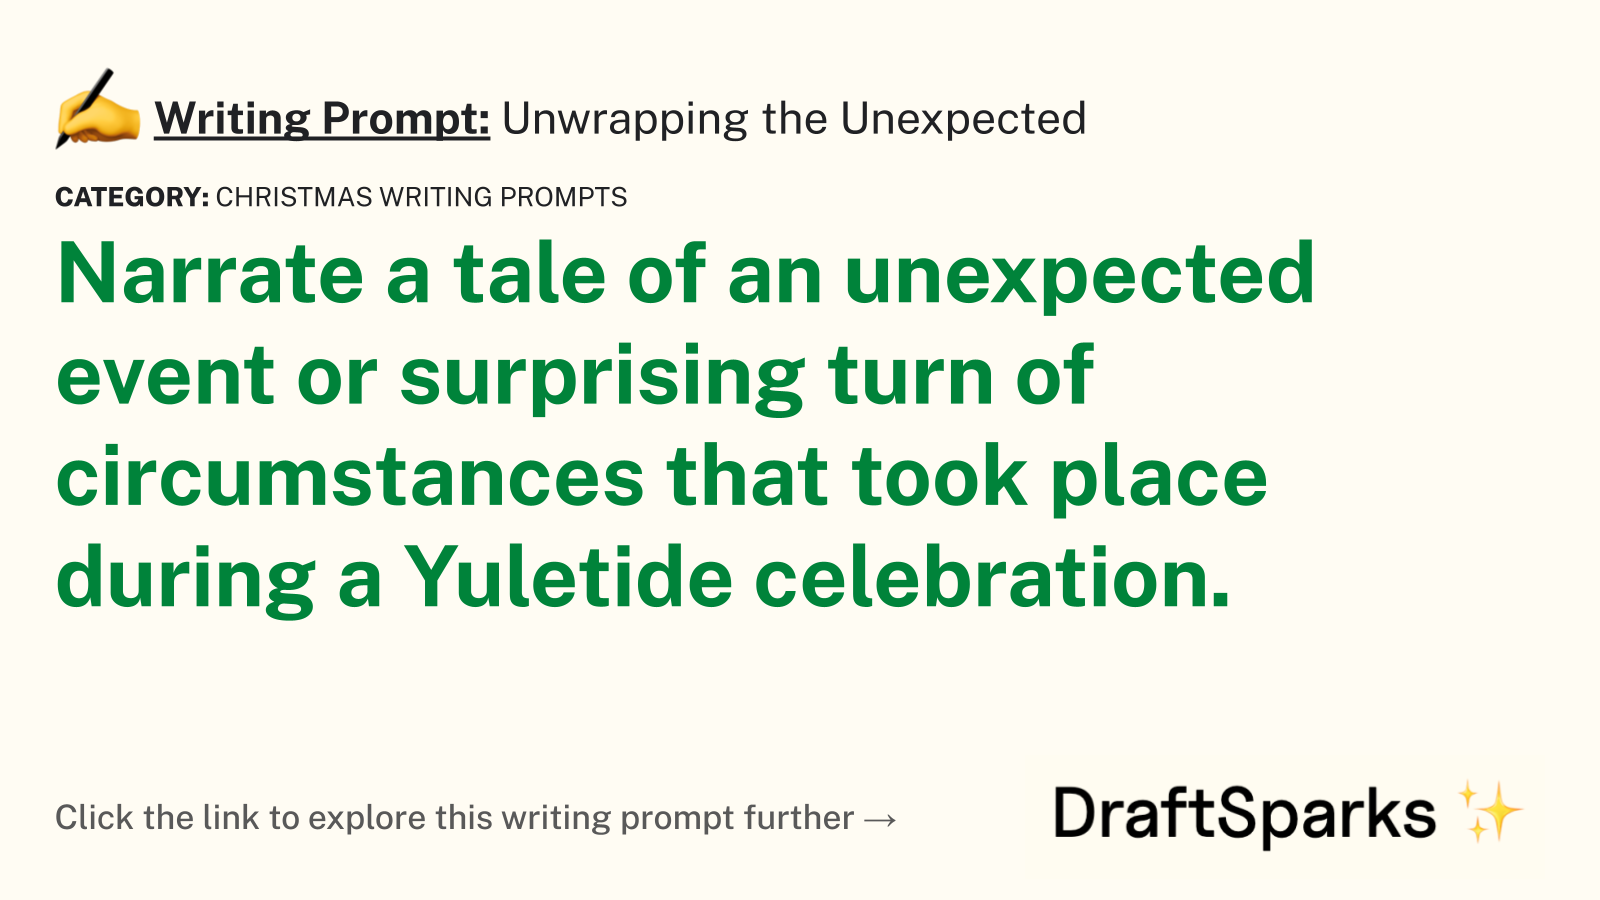 Unwrapping the Unexpected